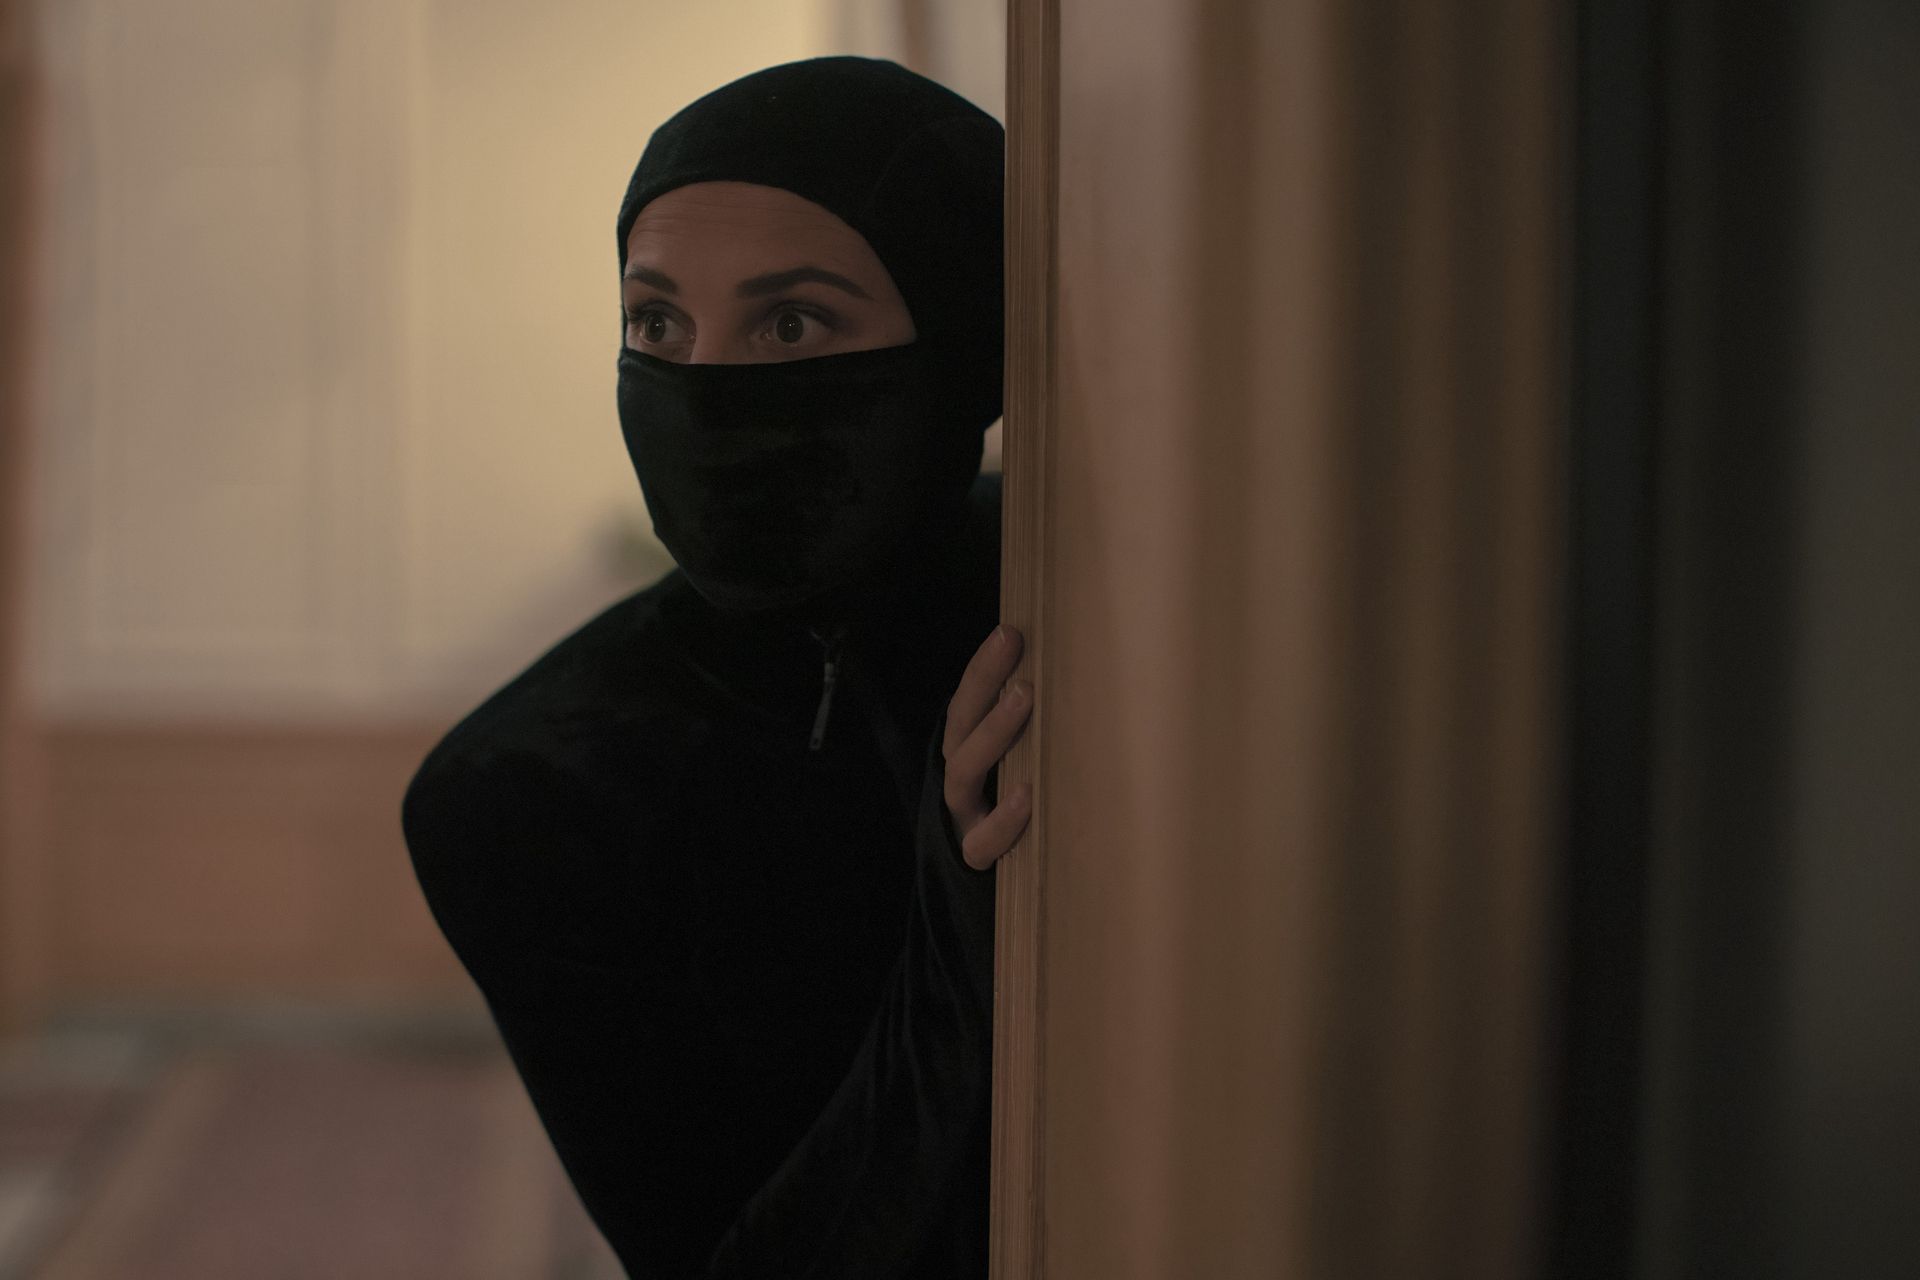 Irma Vep review: Binge series starring Alicia Vikander is a